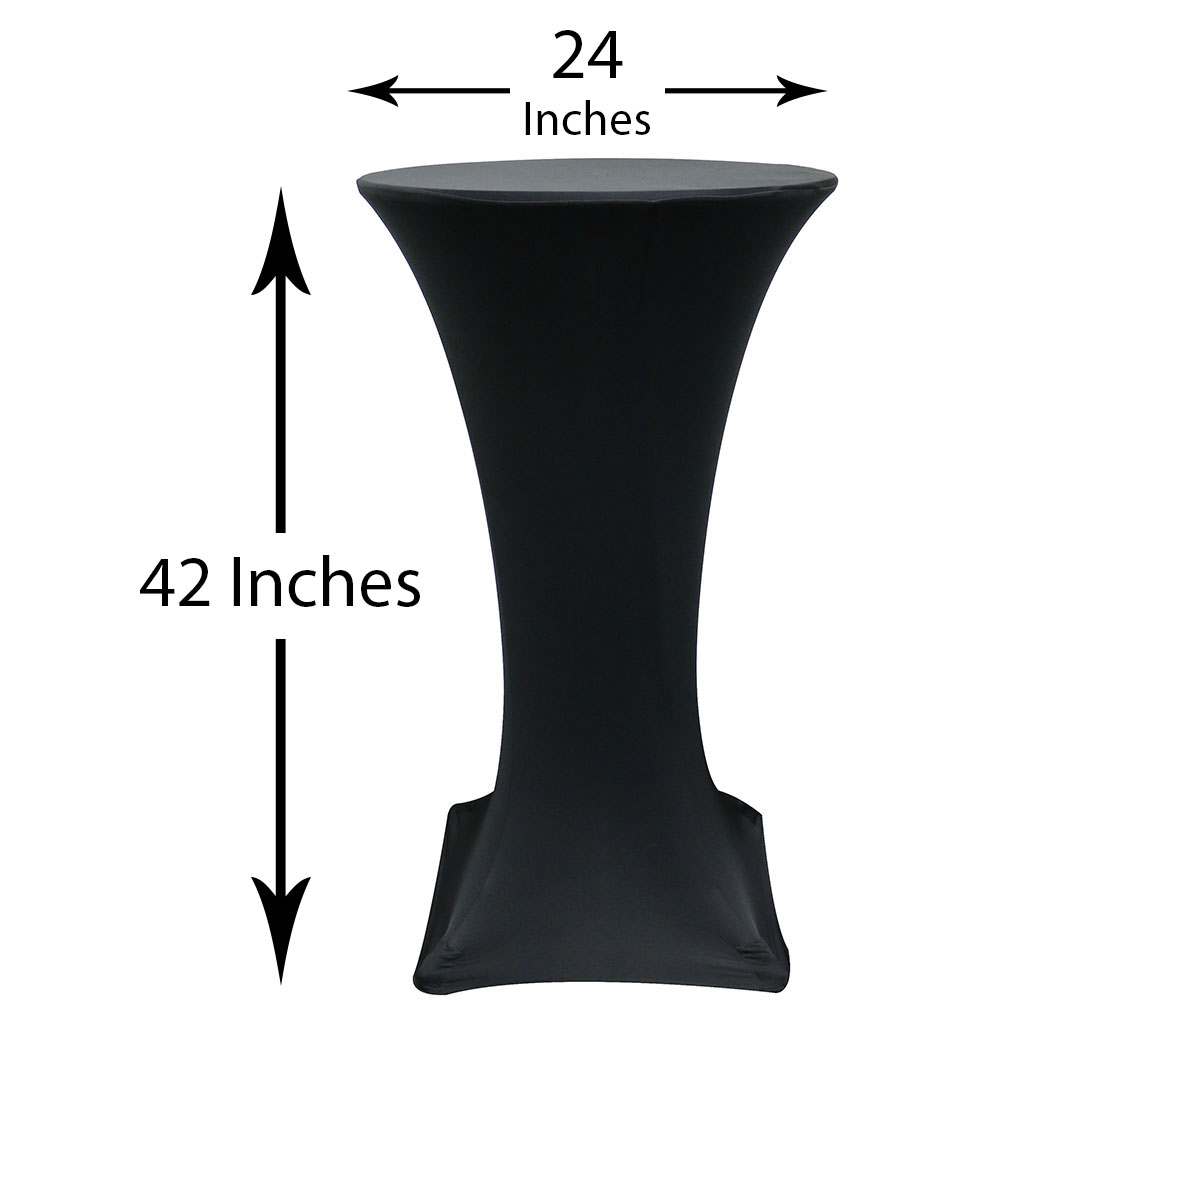 24-inch-highboy-cocktail-spandex-table-covers-black-dimensions.jpg